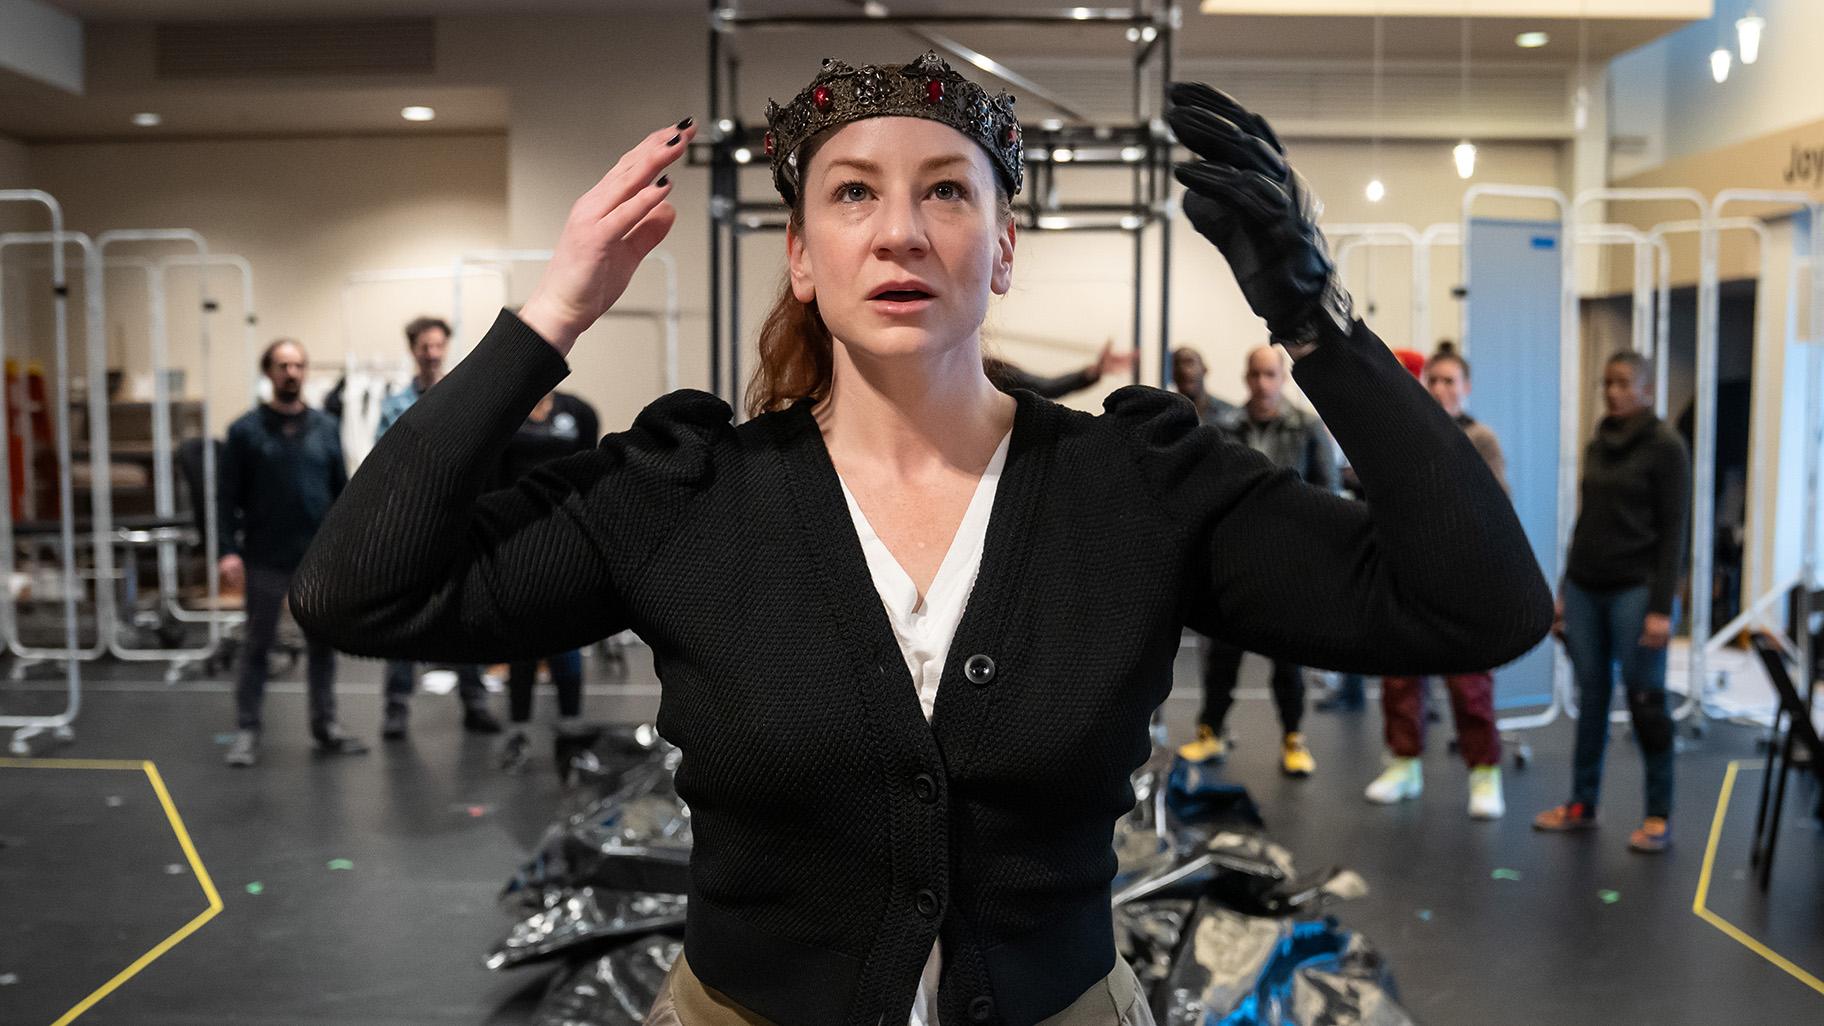 Katy Sullivan, pictured during a rehearsal, stars in a production of “Richard III” at Chicago Shakespeare Theater. (Credit: Liz Lauren)